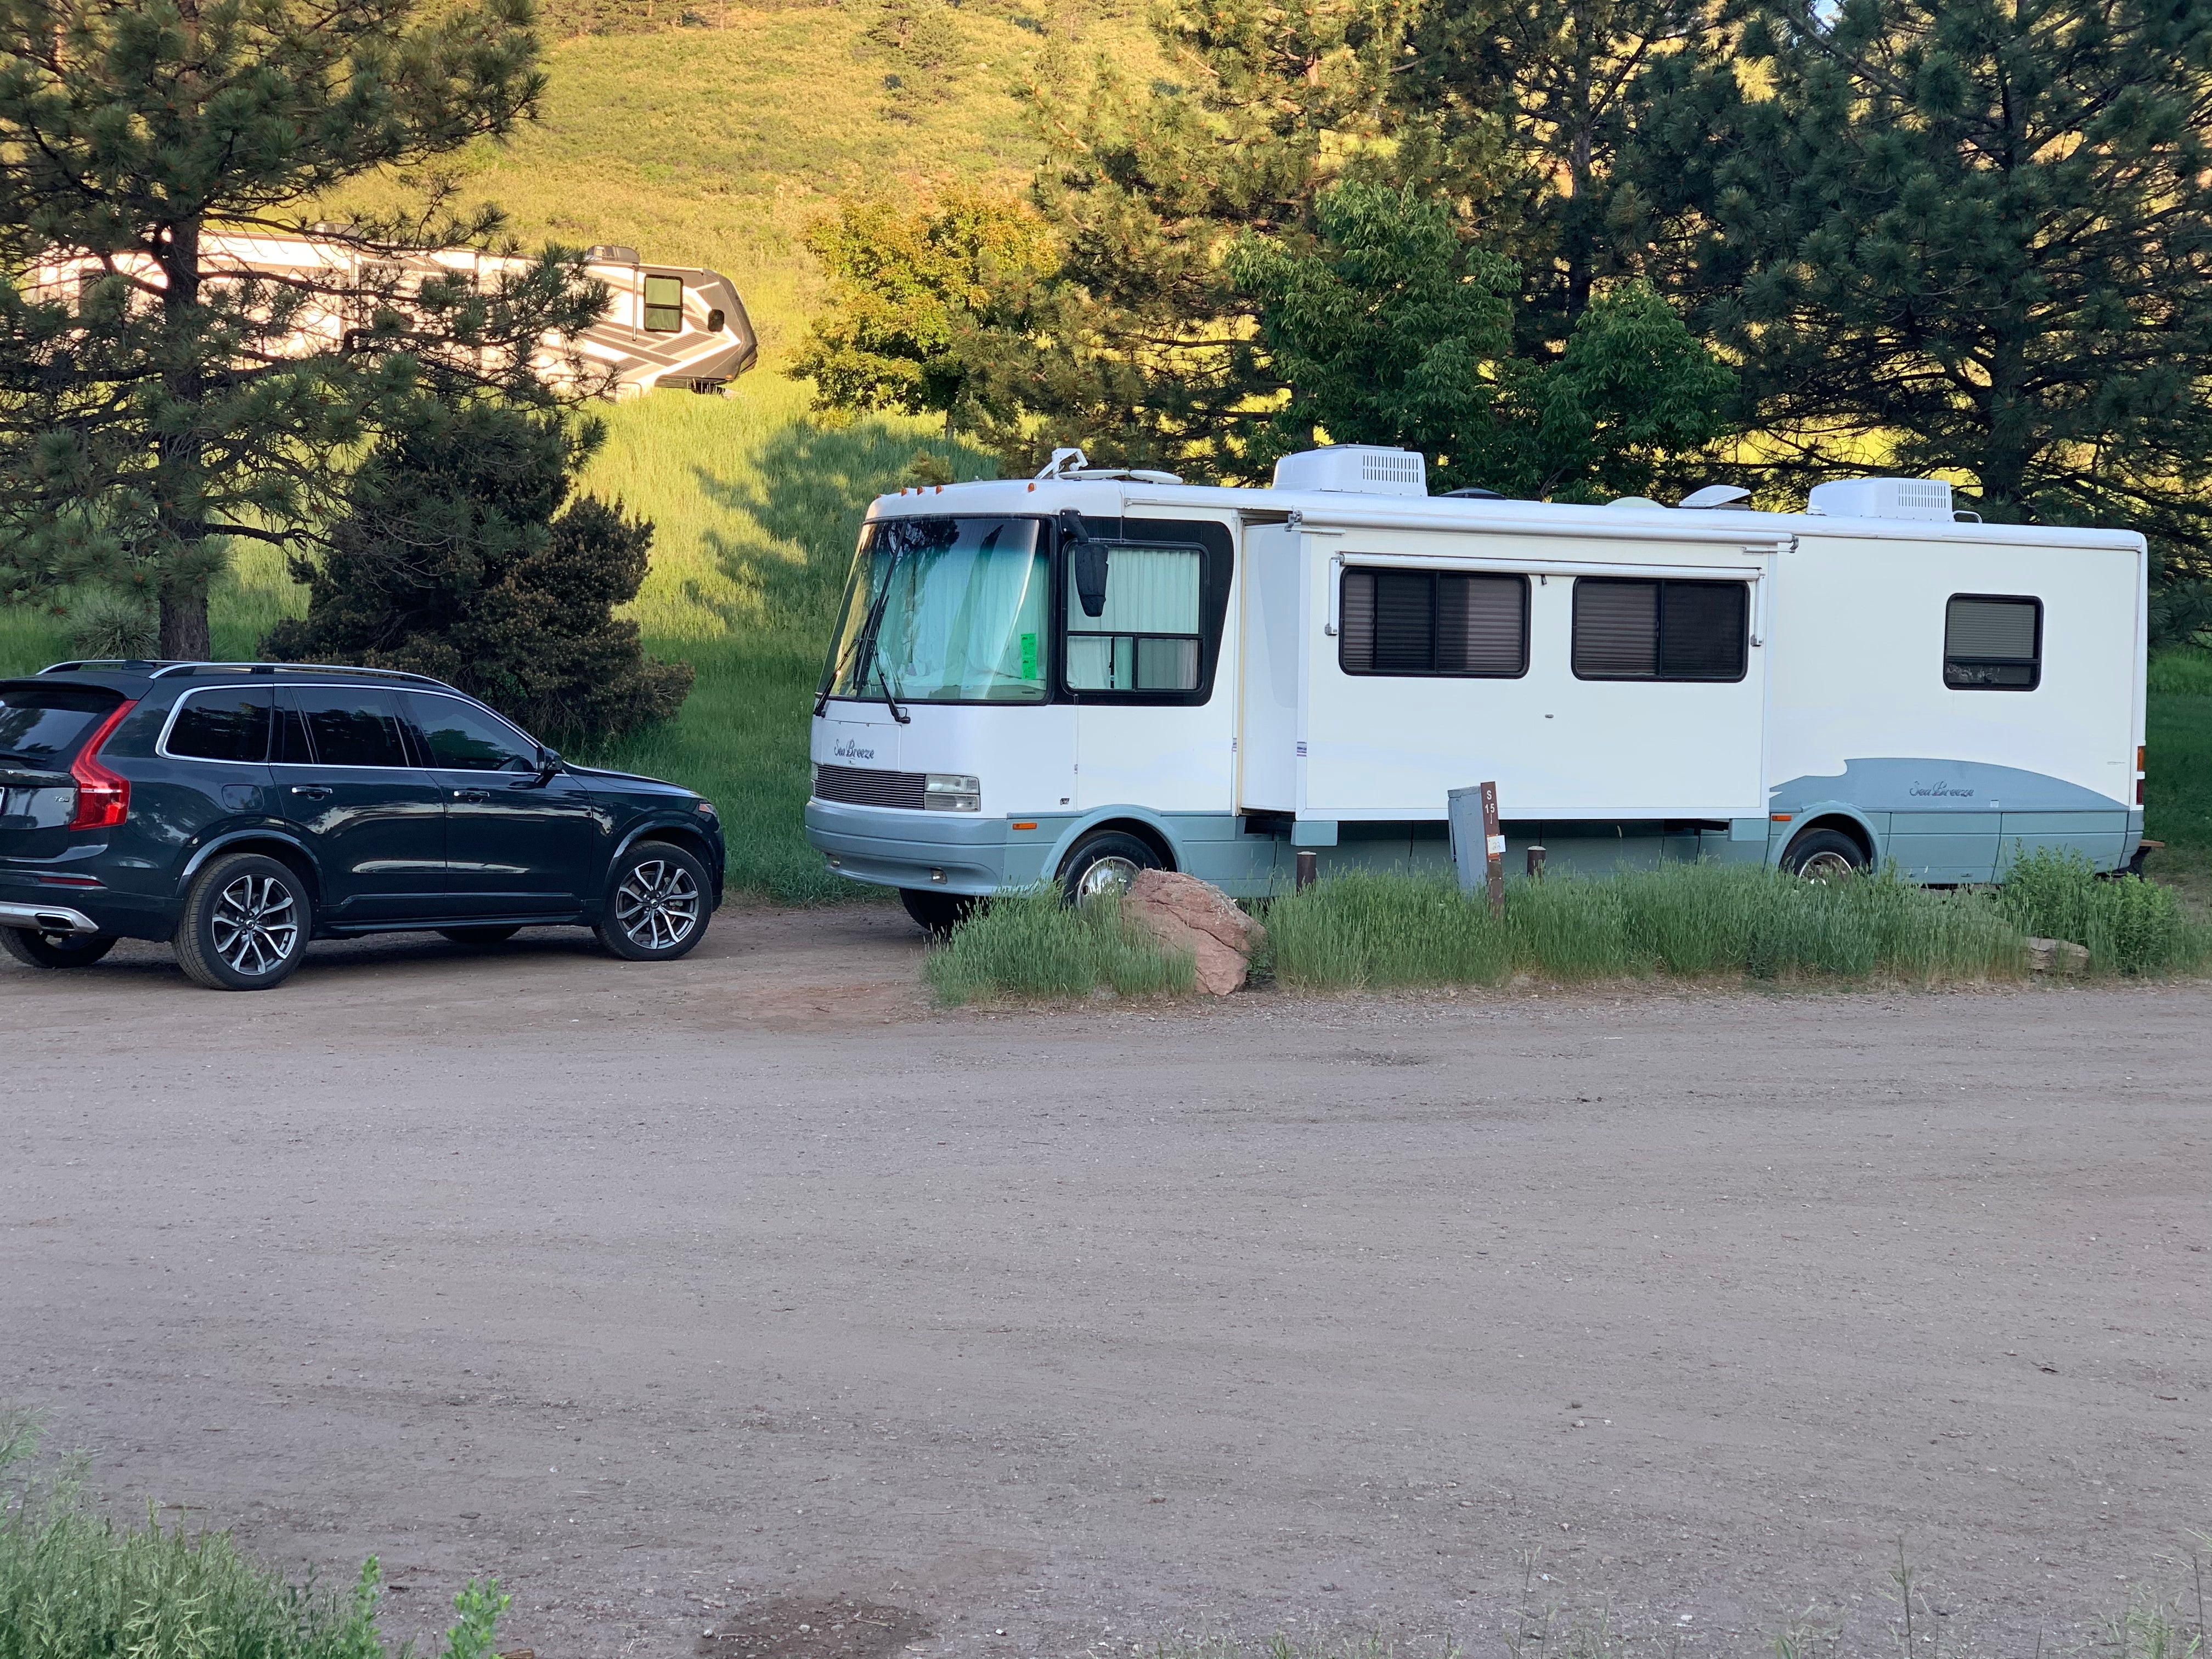 Camper submitted image from Horsetooth Reservoir County Park South Bay - 2